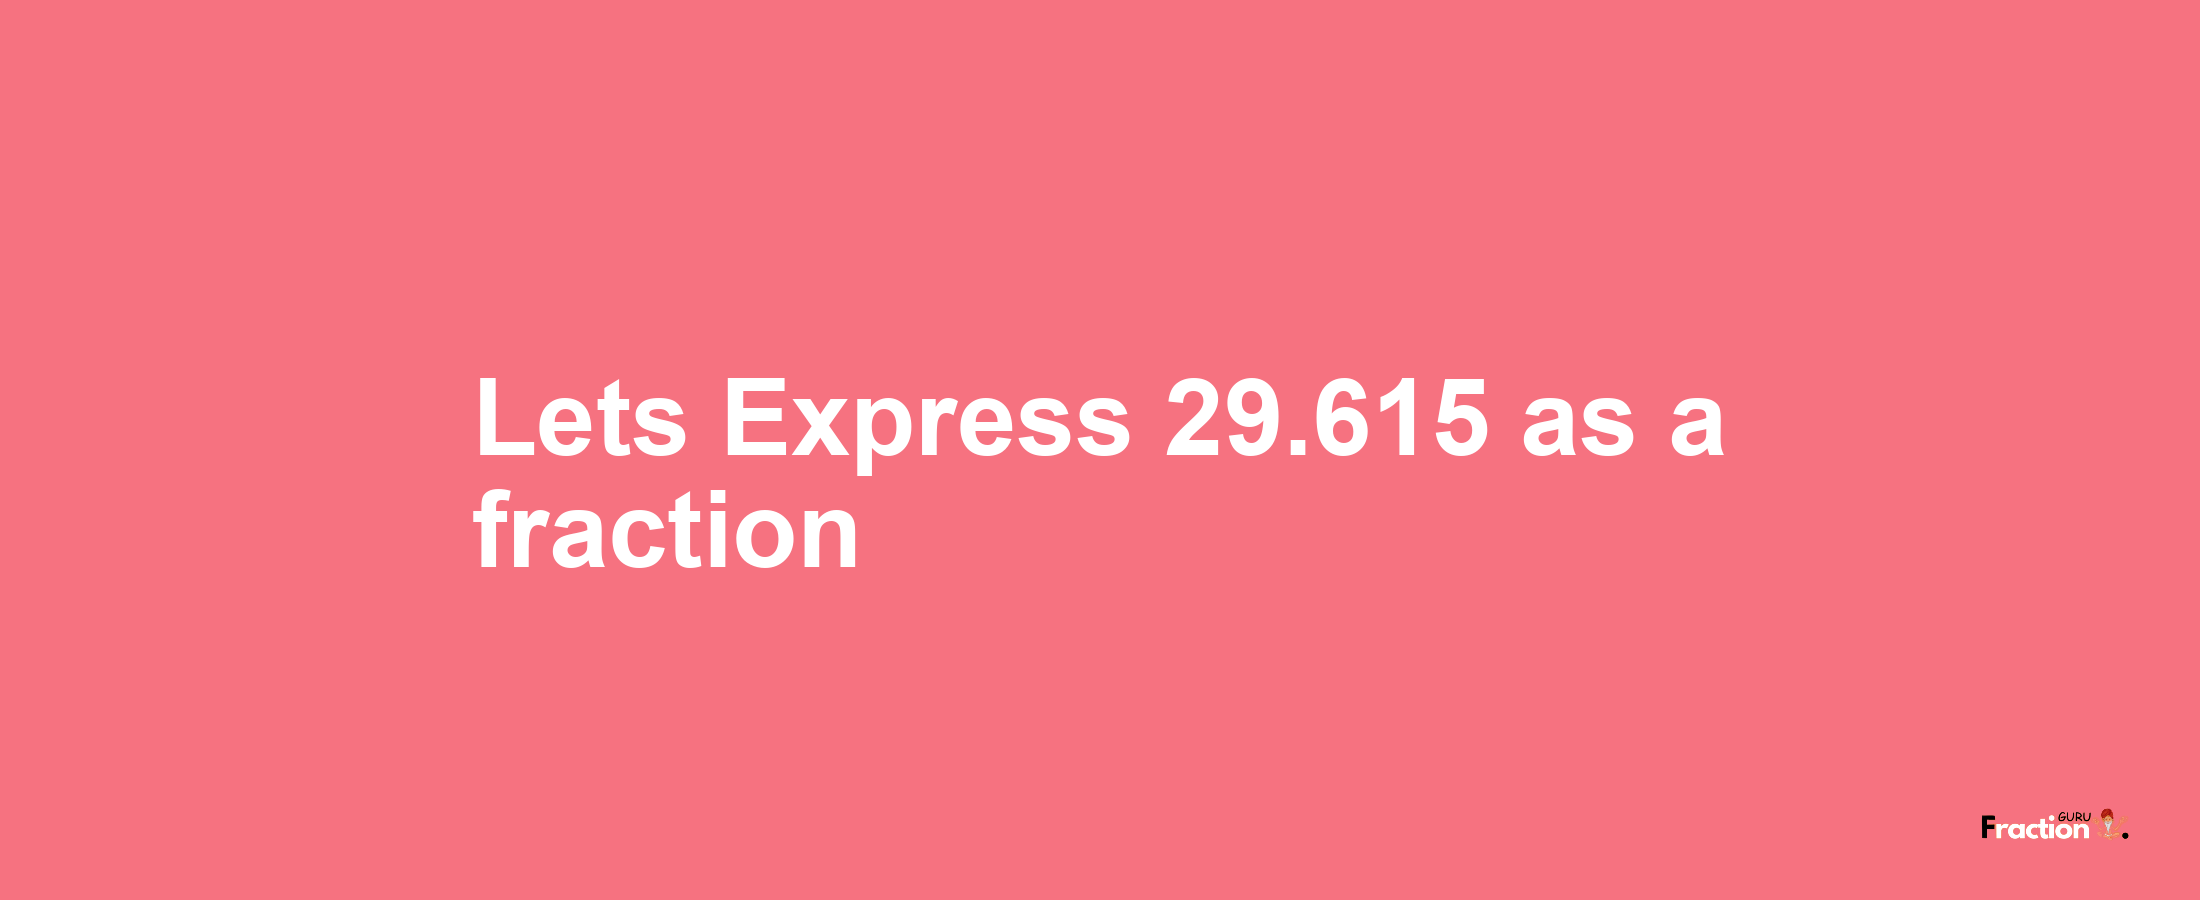 Lets Express 29.615 as afraction